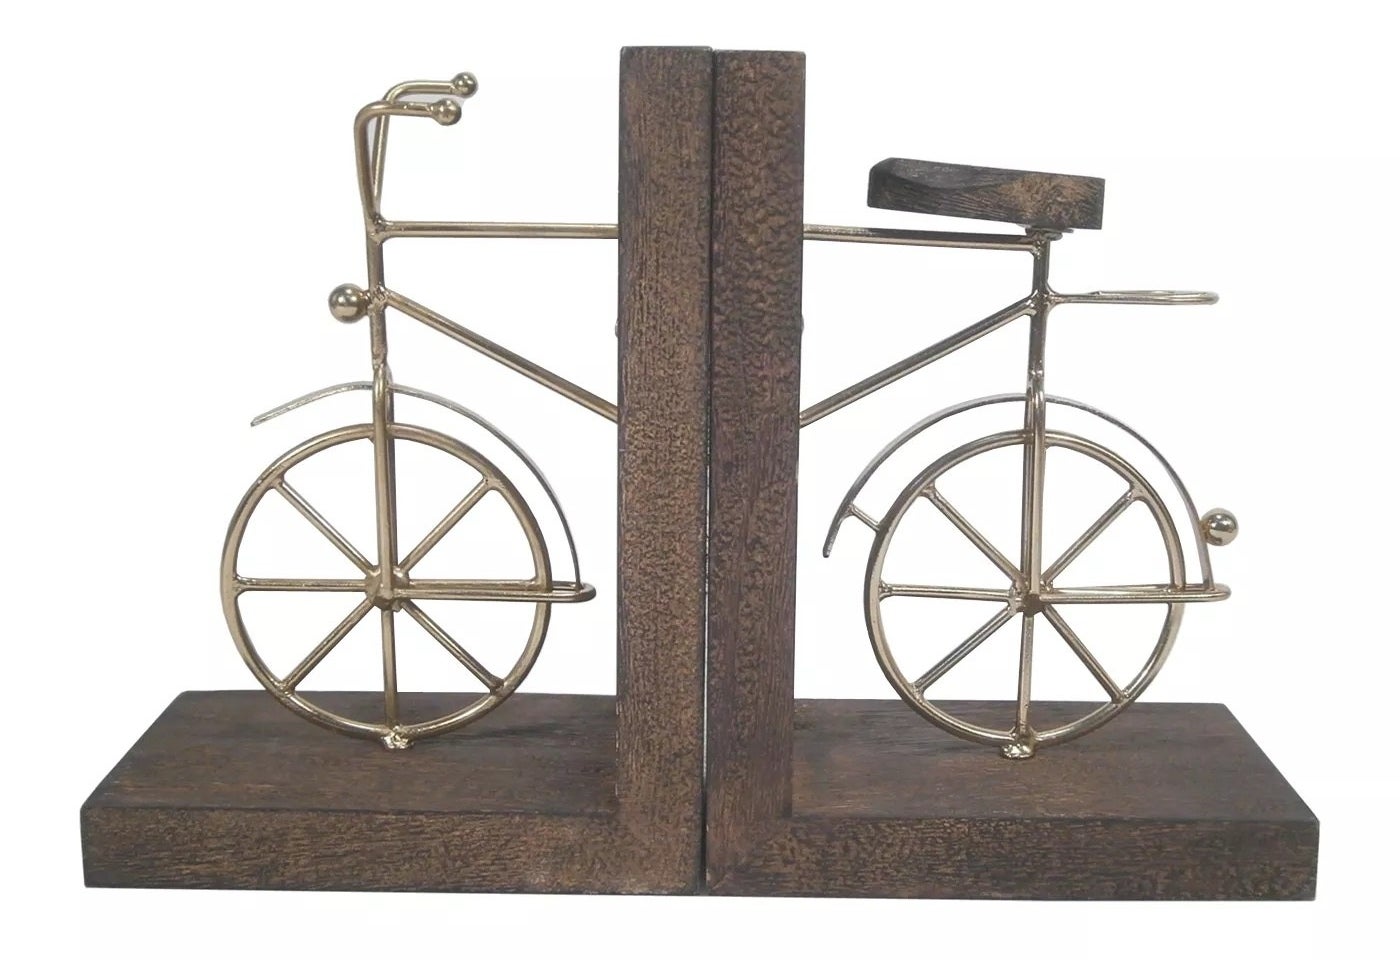 The bicycle bookends